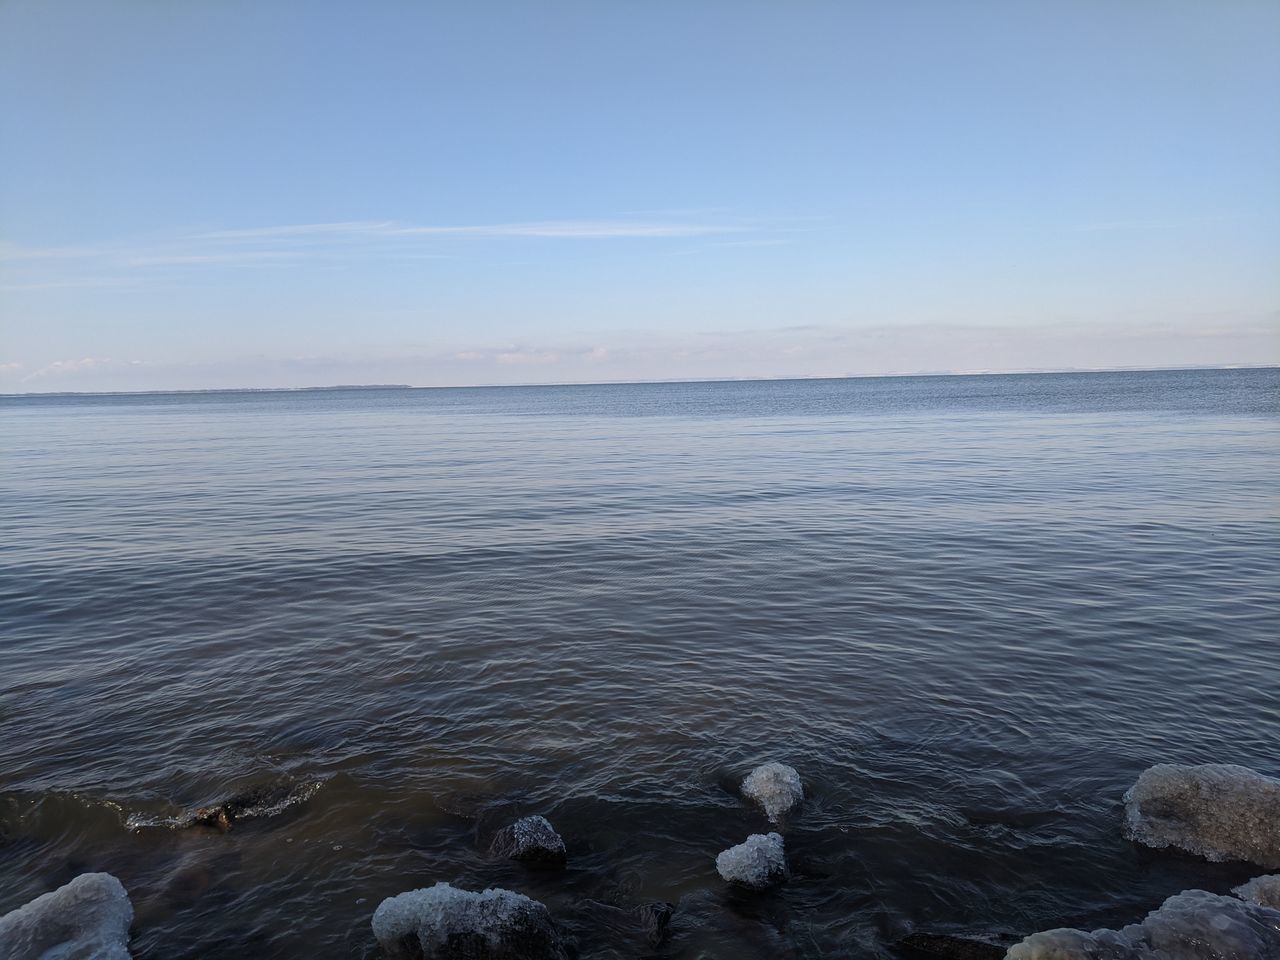 water, sea, sky, shore, ocean, beauty in nature, horizon, scenics - nature, coast, nature, body of water, tranquility, tranquil scene, rock, beach, land, horizon over water, day, no people, outdoors, idyllic, non-urban scene, reflection, clear sky, blue, wave, cloud, environment, bay, ice